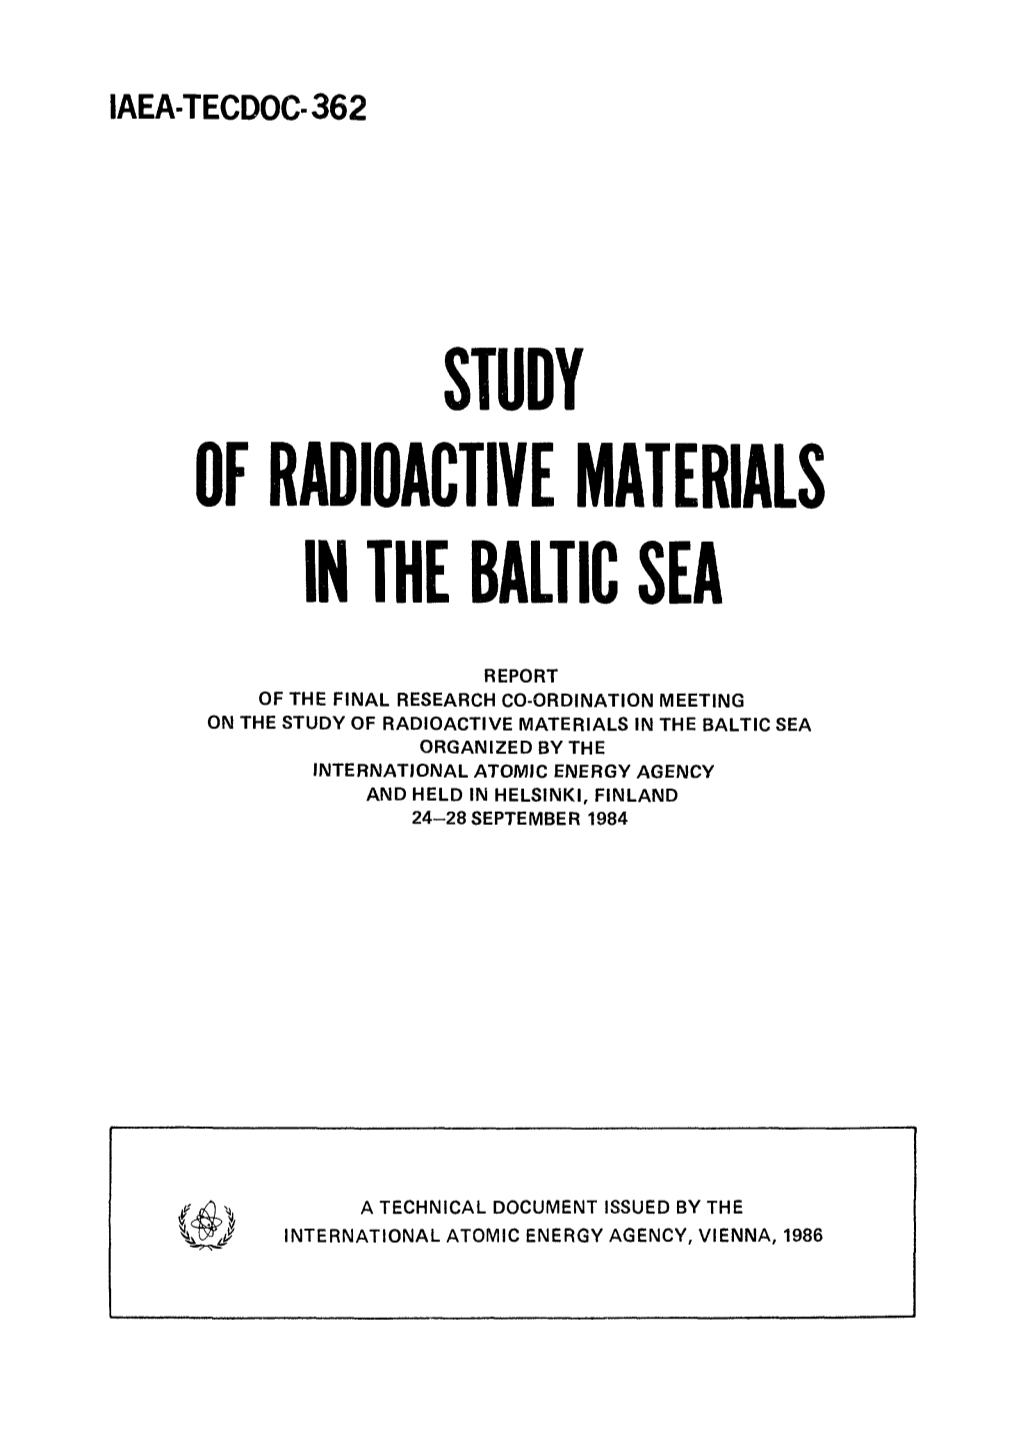 Study of Radioactive Materials in the Baltic Sea